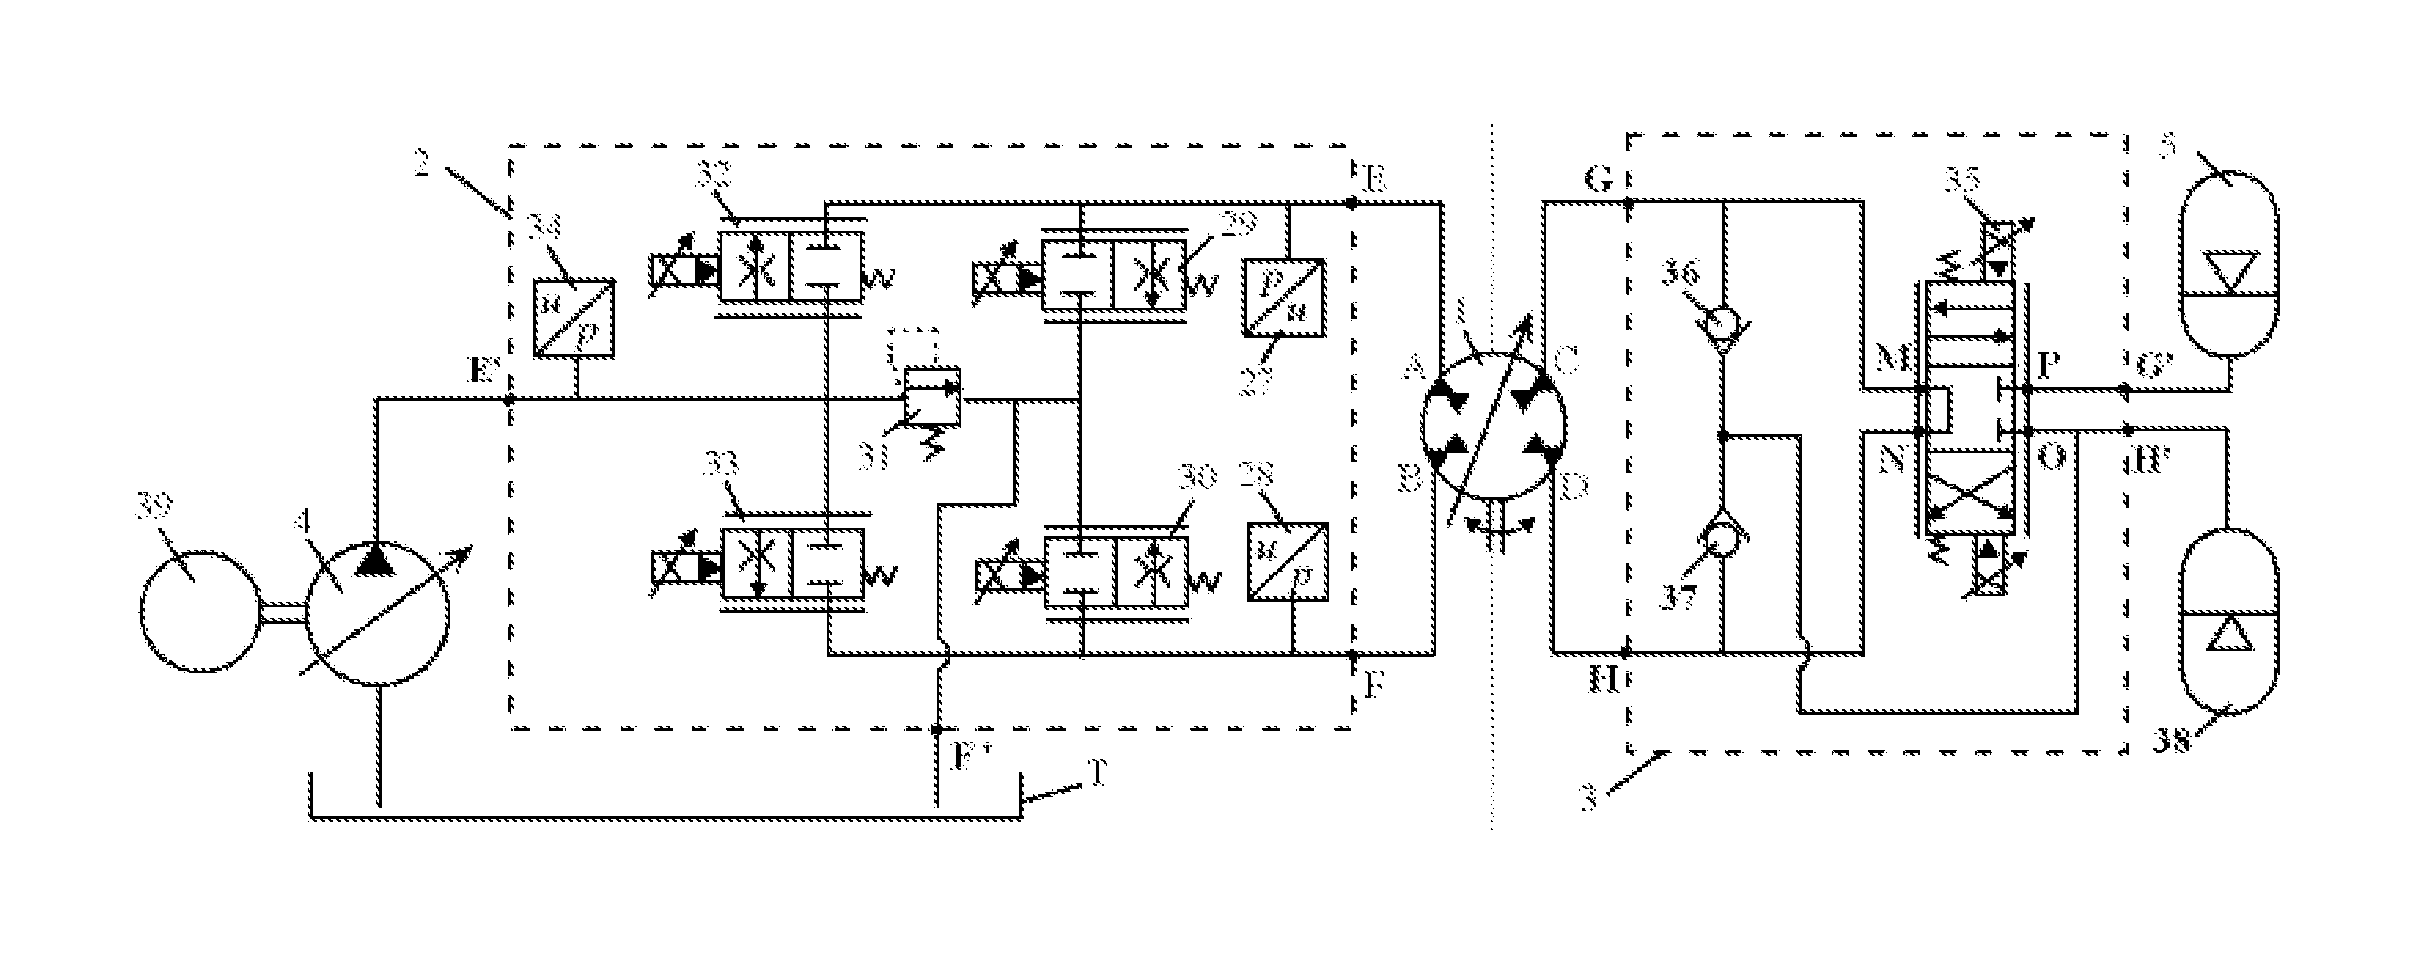 Double-loop control system with single hydraulic motor